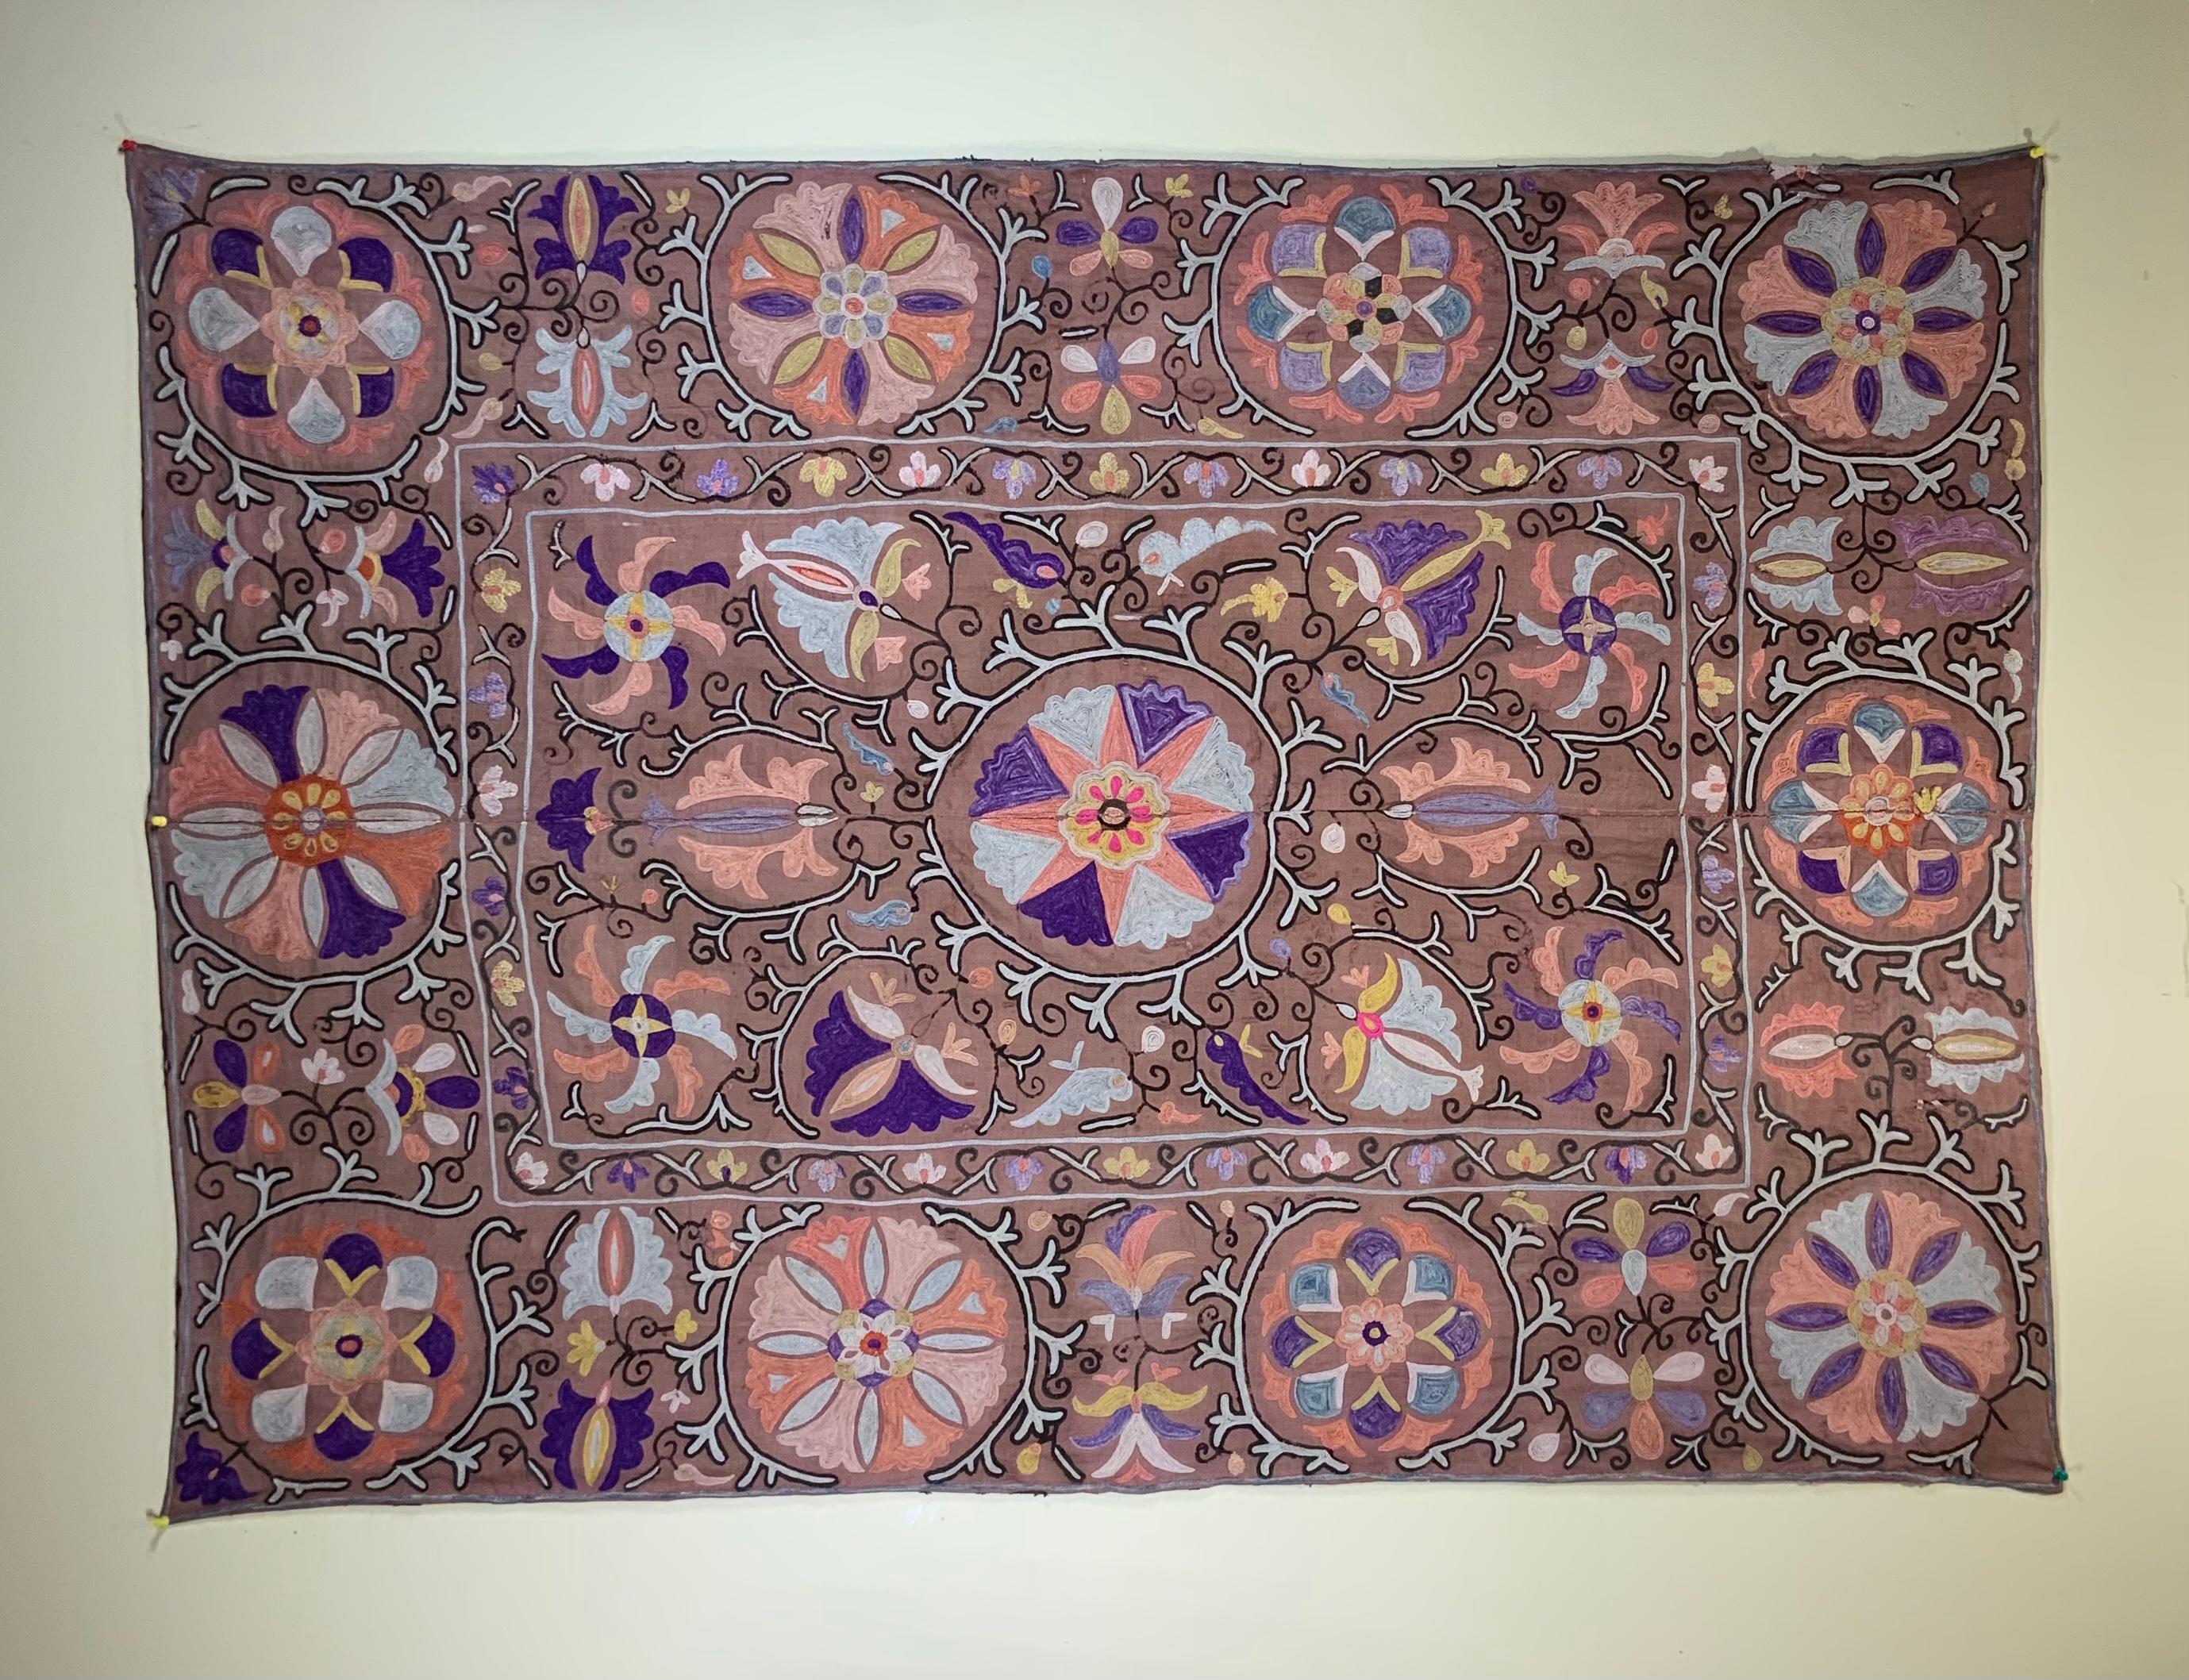 Antique Suzani textile made of hand embroidery intricate scrolling vines and flowers motifs on a handwoven cotton background. Professionally restored and backed with fine linen textile.
Could use as wall hanging or on top of table or